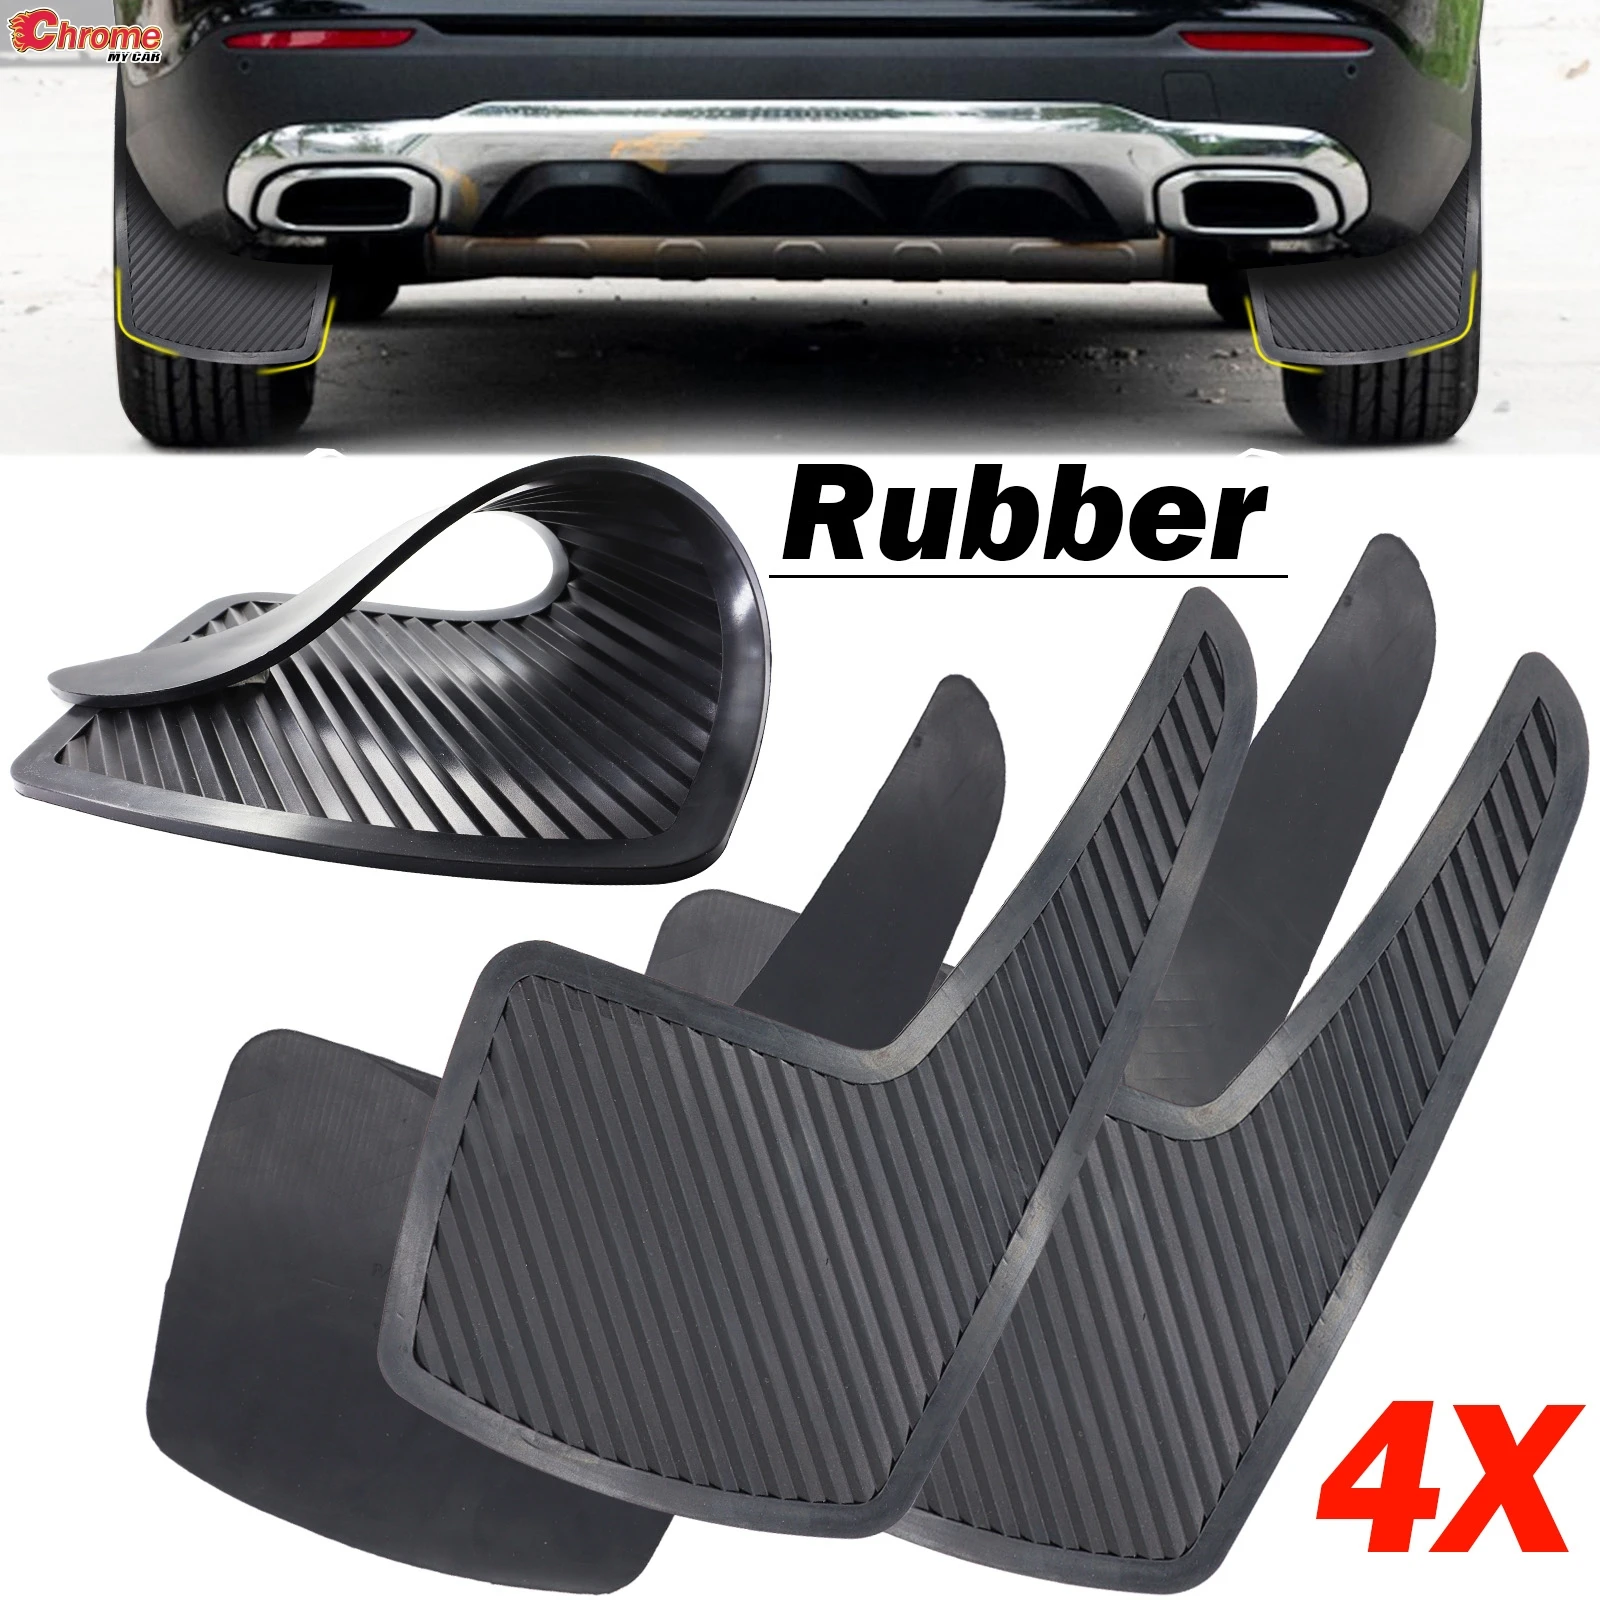 

4x Rubber Mud Flaps Mudflaps Splash Guards Front Rear For Cars Pickup SUV Van Truck For BMW 1 2 3 4 5 7 X1 X2 X3 X5 Universal